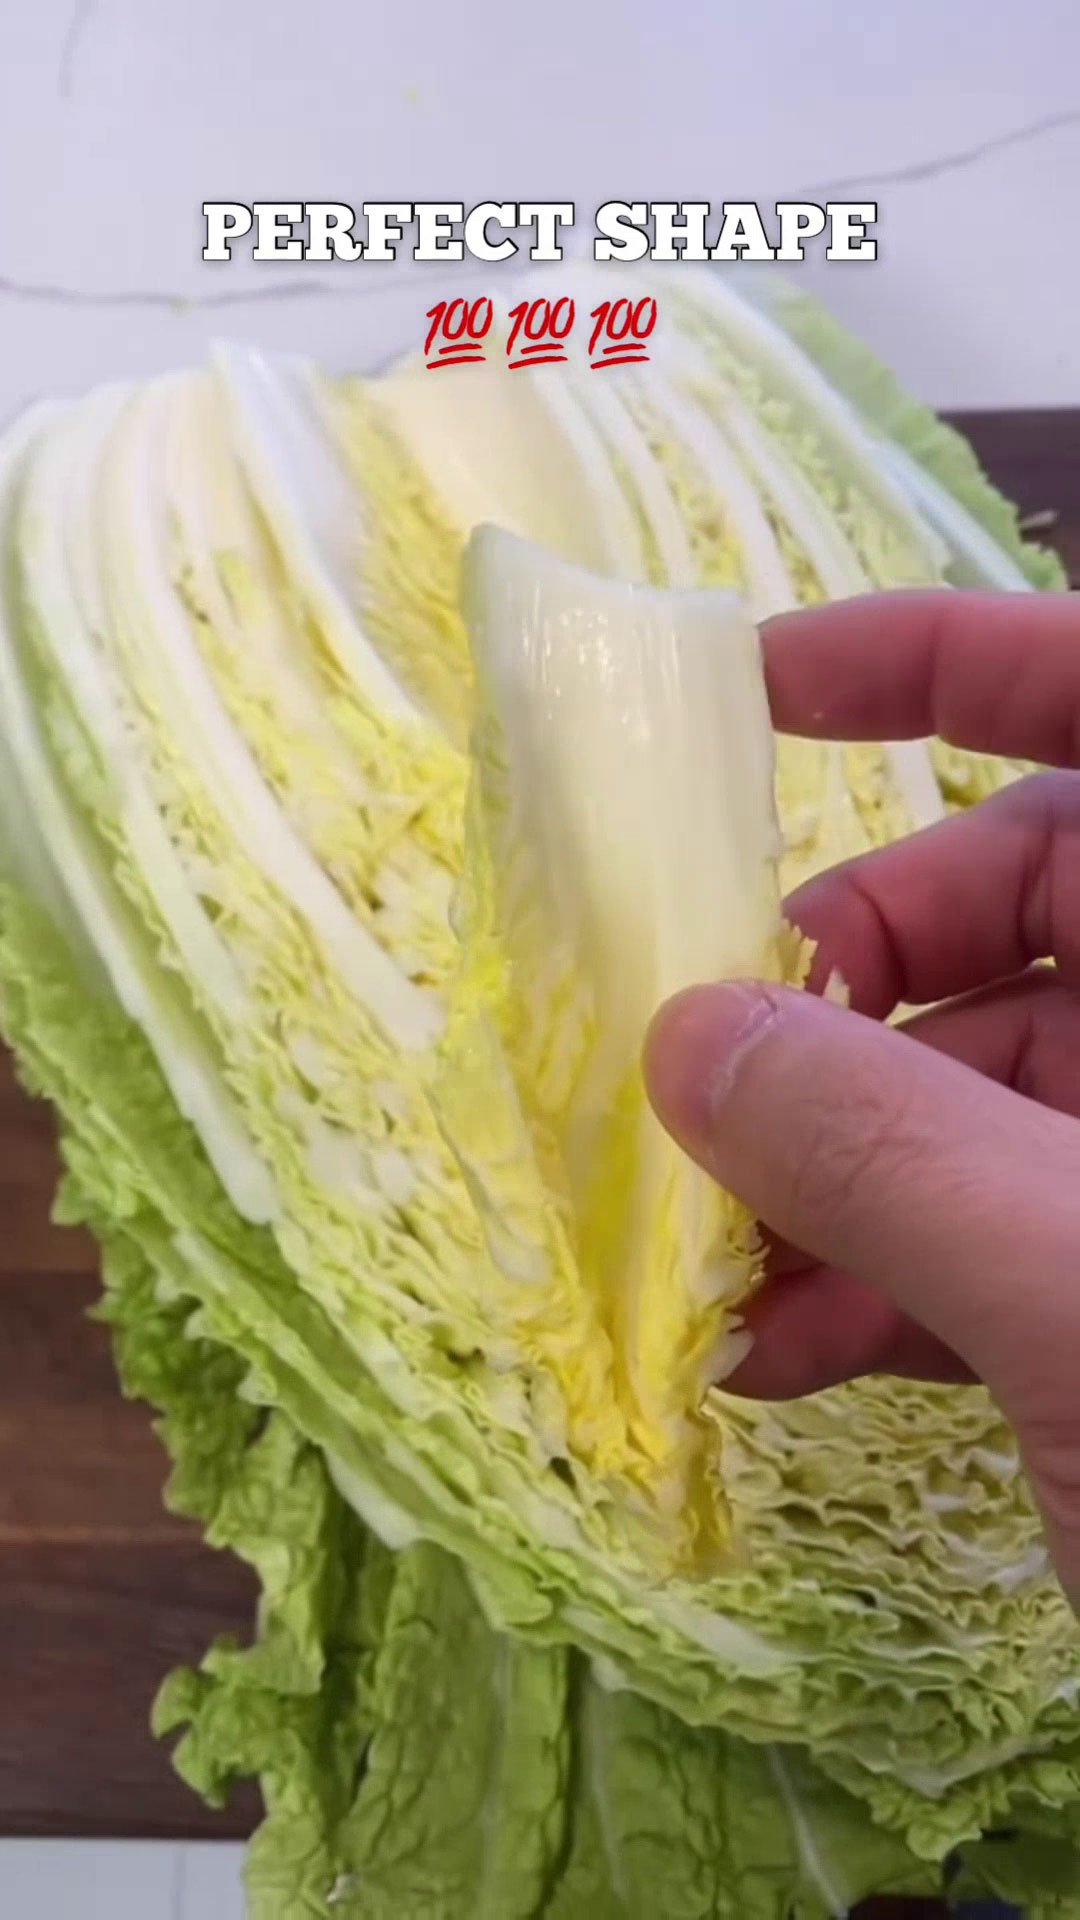 The perfect shape of cabbage in kimchi 